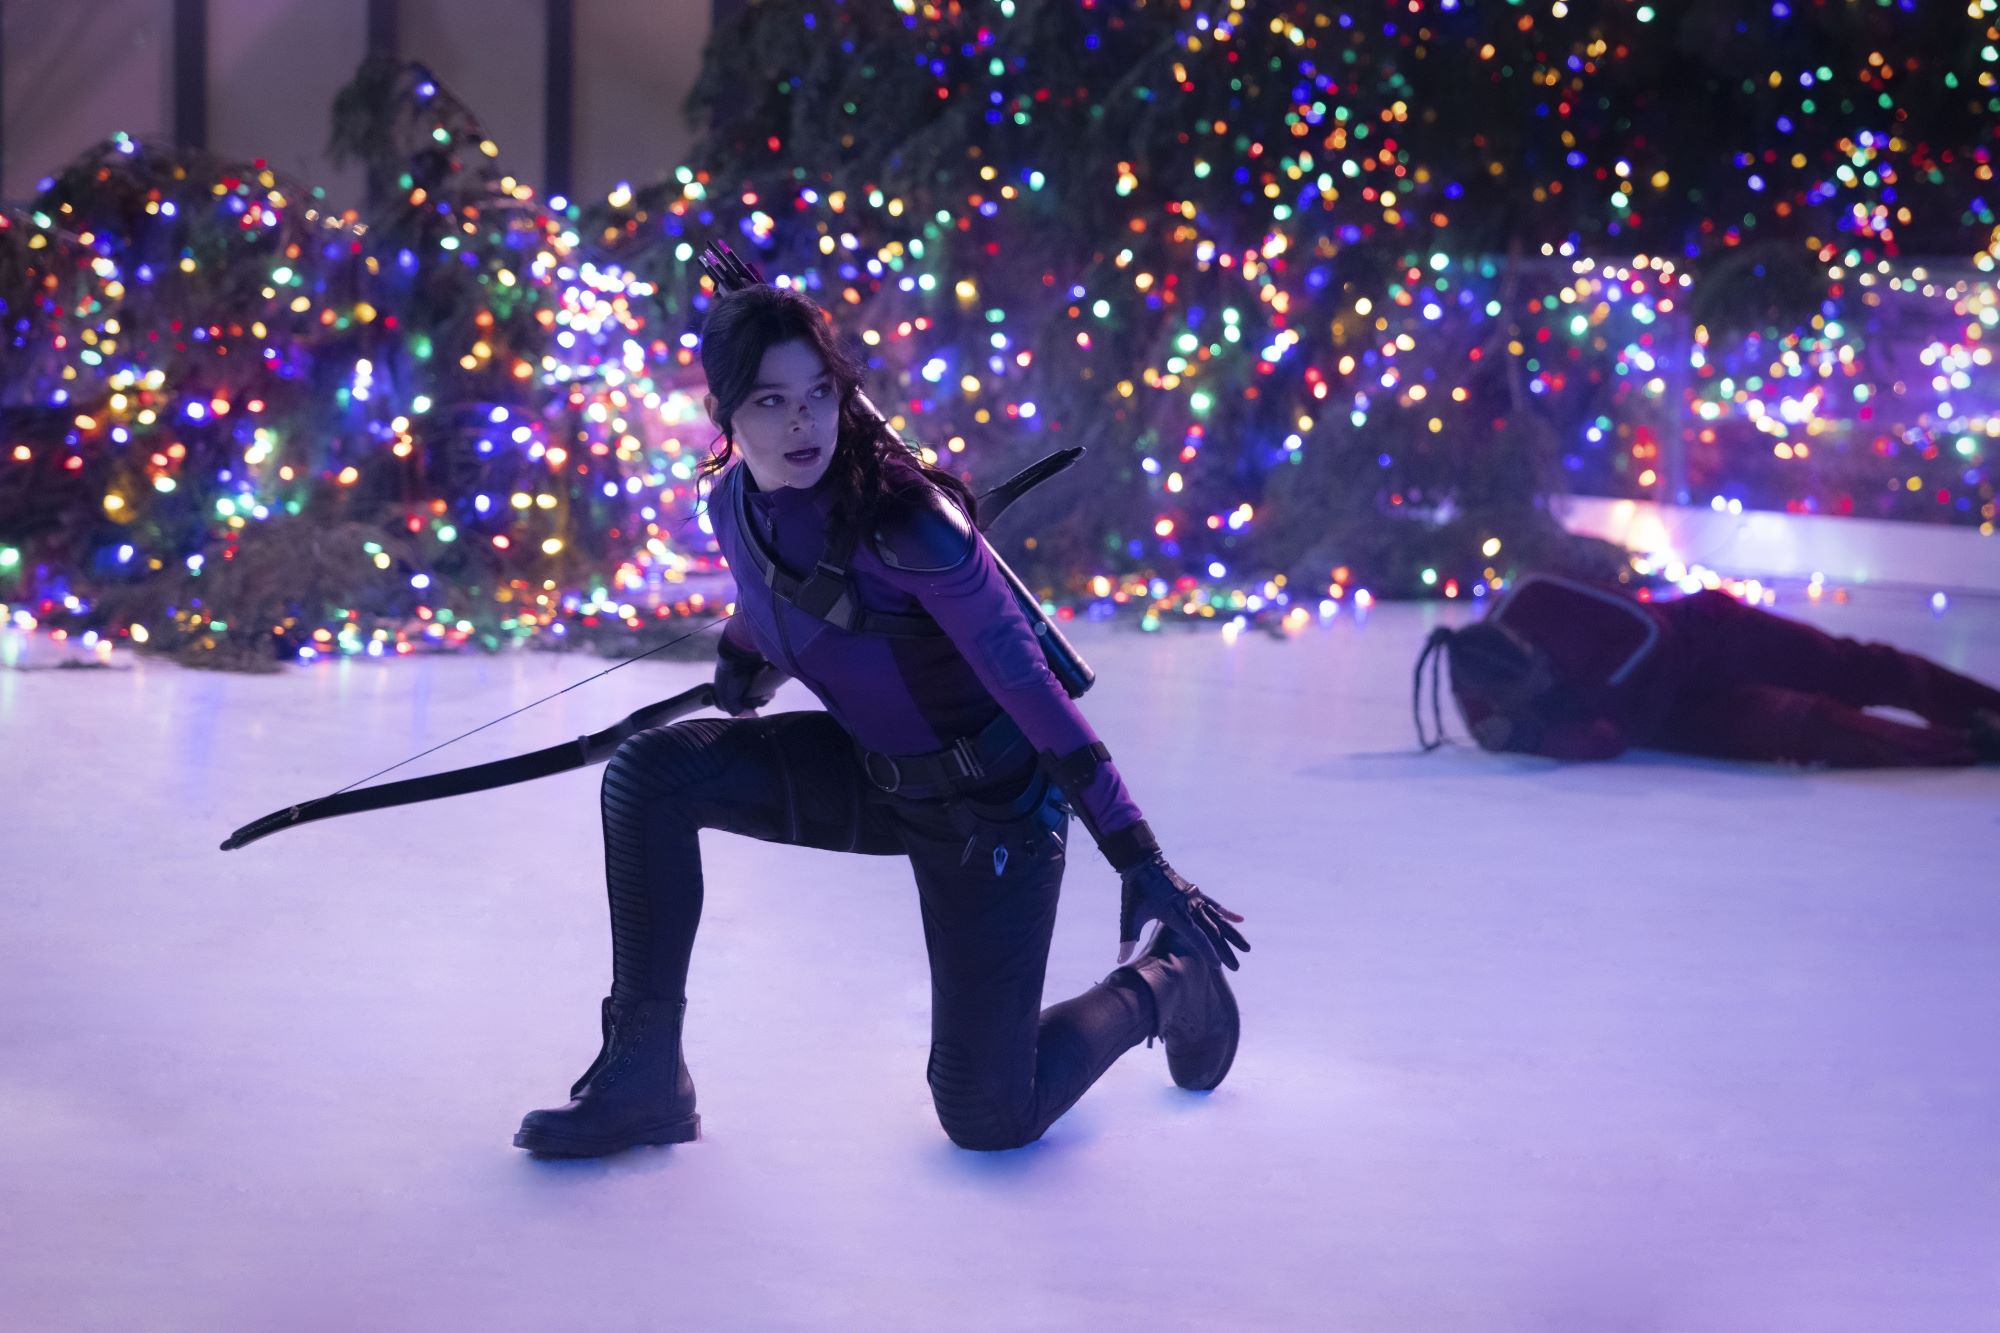 Hailee Steinfeld wears her purple and black suit and wields a bow and arrow as Kate Bishop in 'Hawkeye,' which likely won't have a season 2.